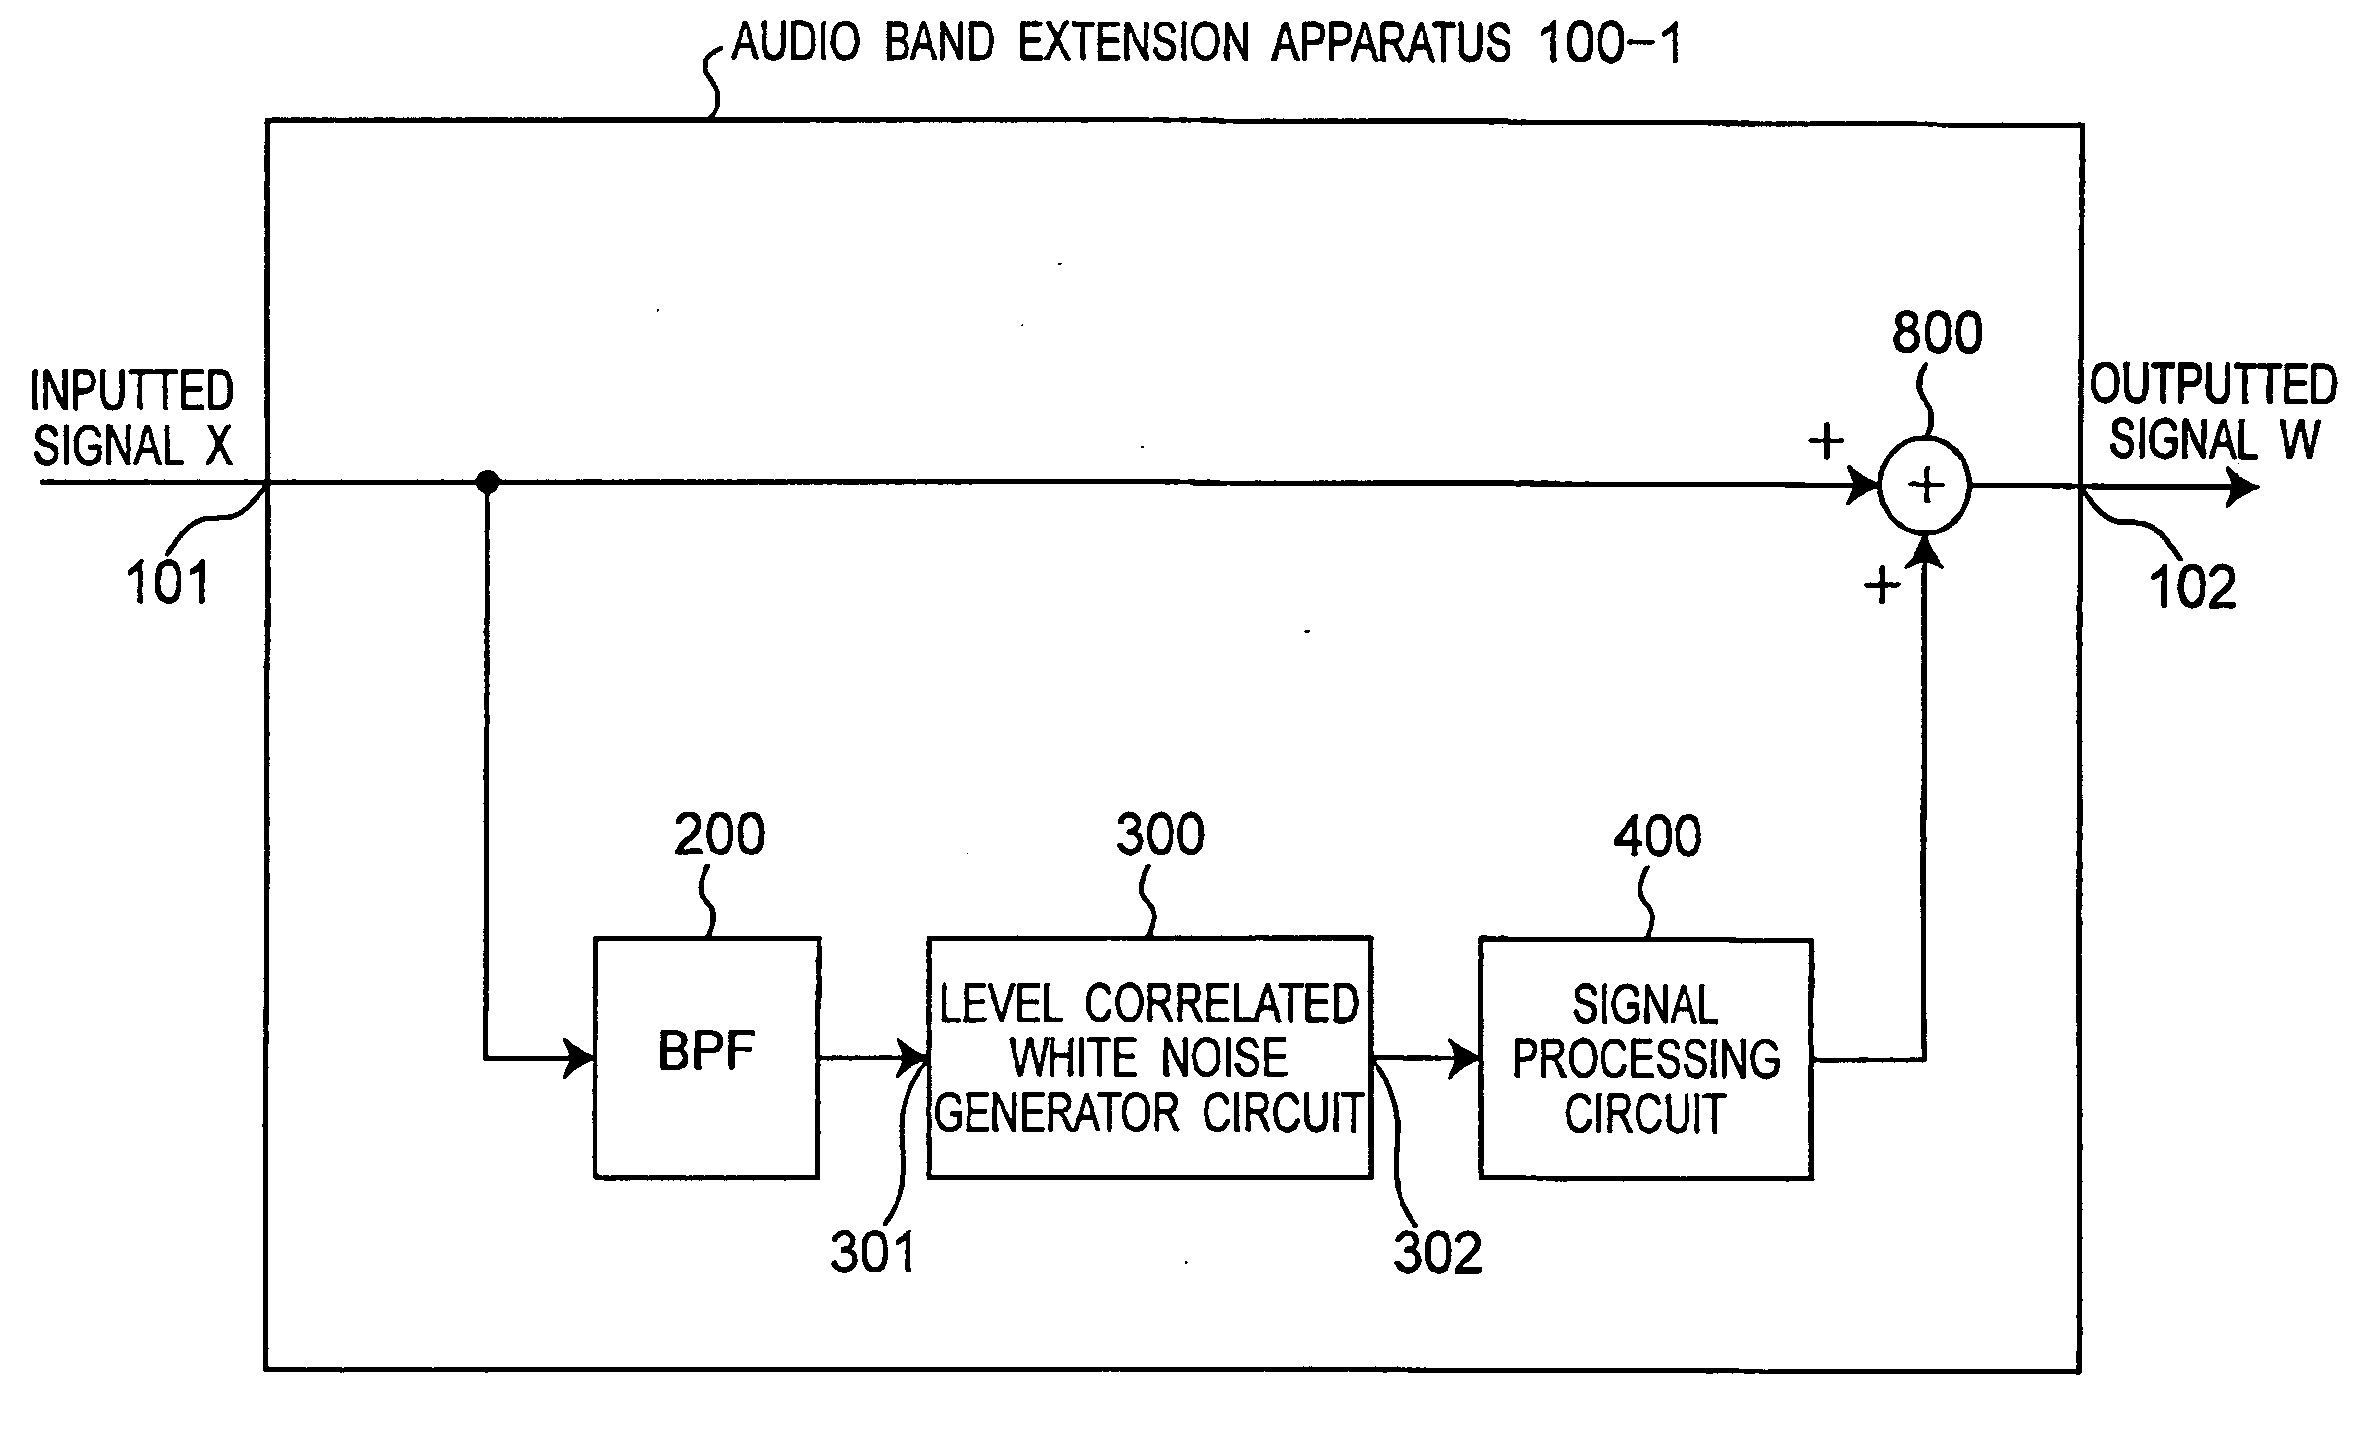 Method and apparatus for extending band of audio signal using noise signal generator